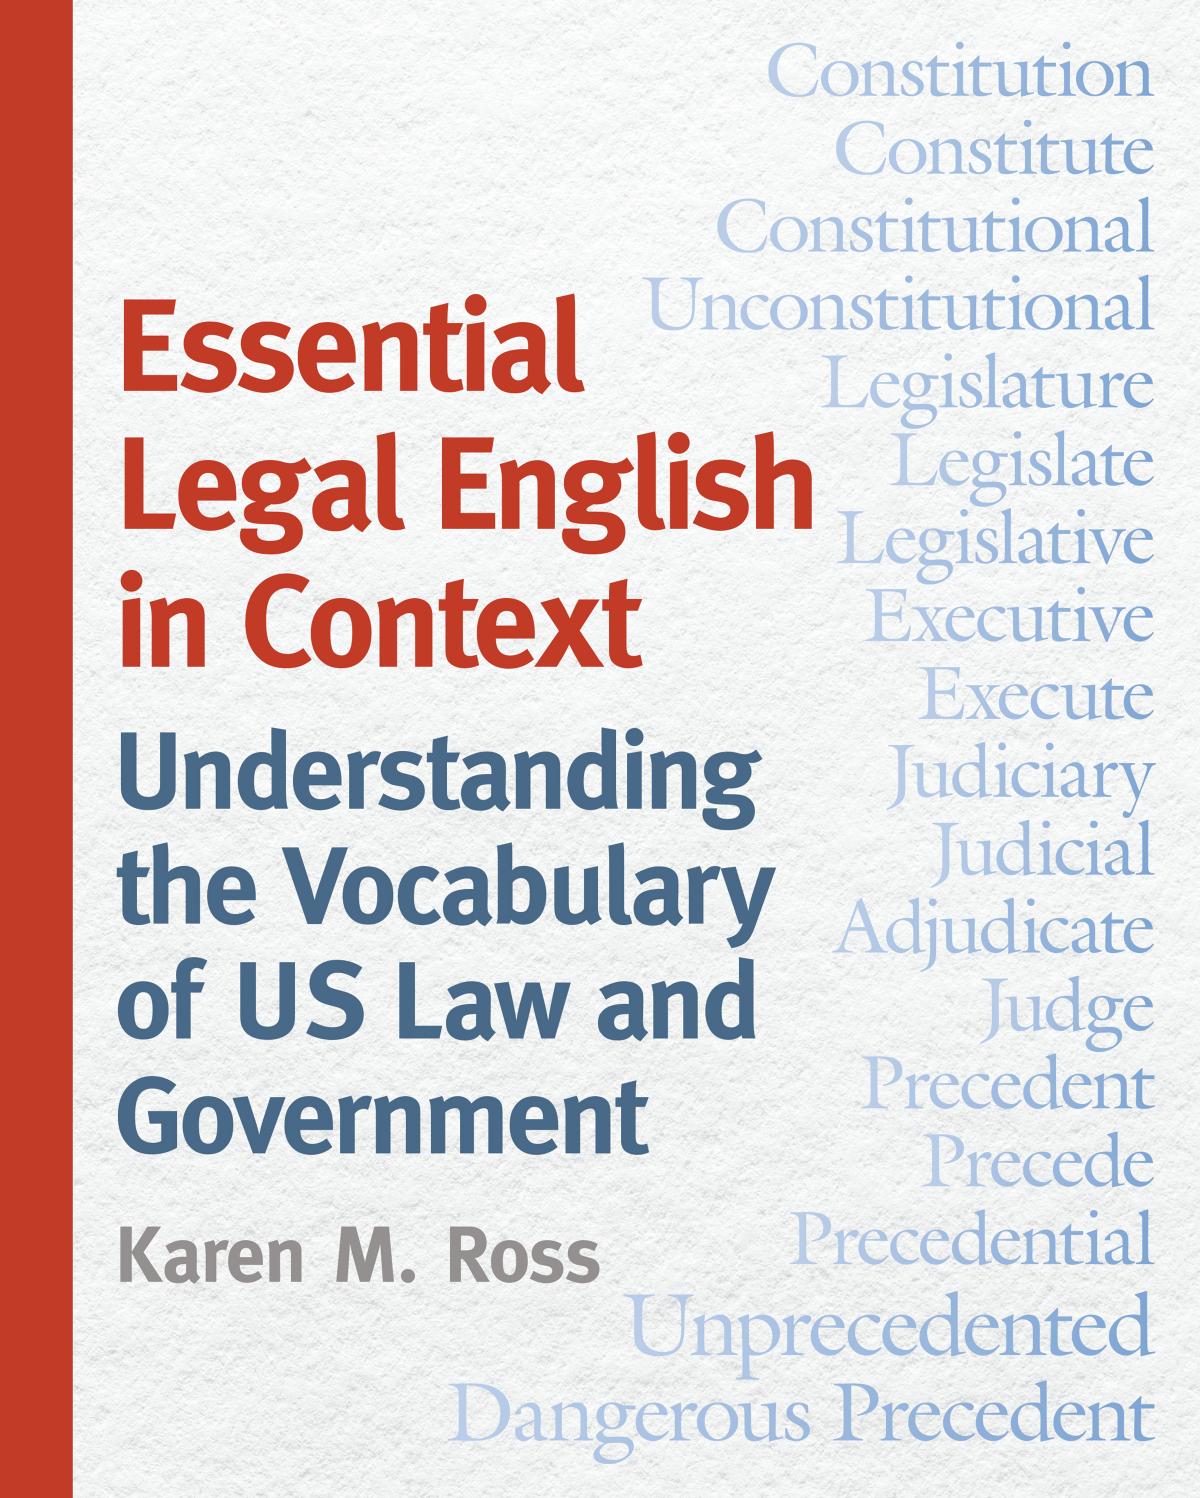 Essential Legal English in Context Understanding the Vocabulary of US Law and Government - Karen M. Ross.jpg